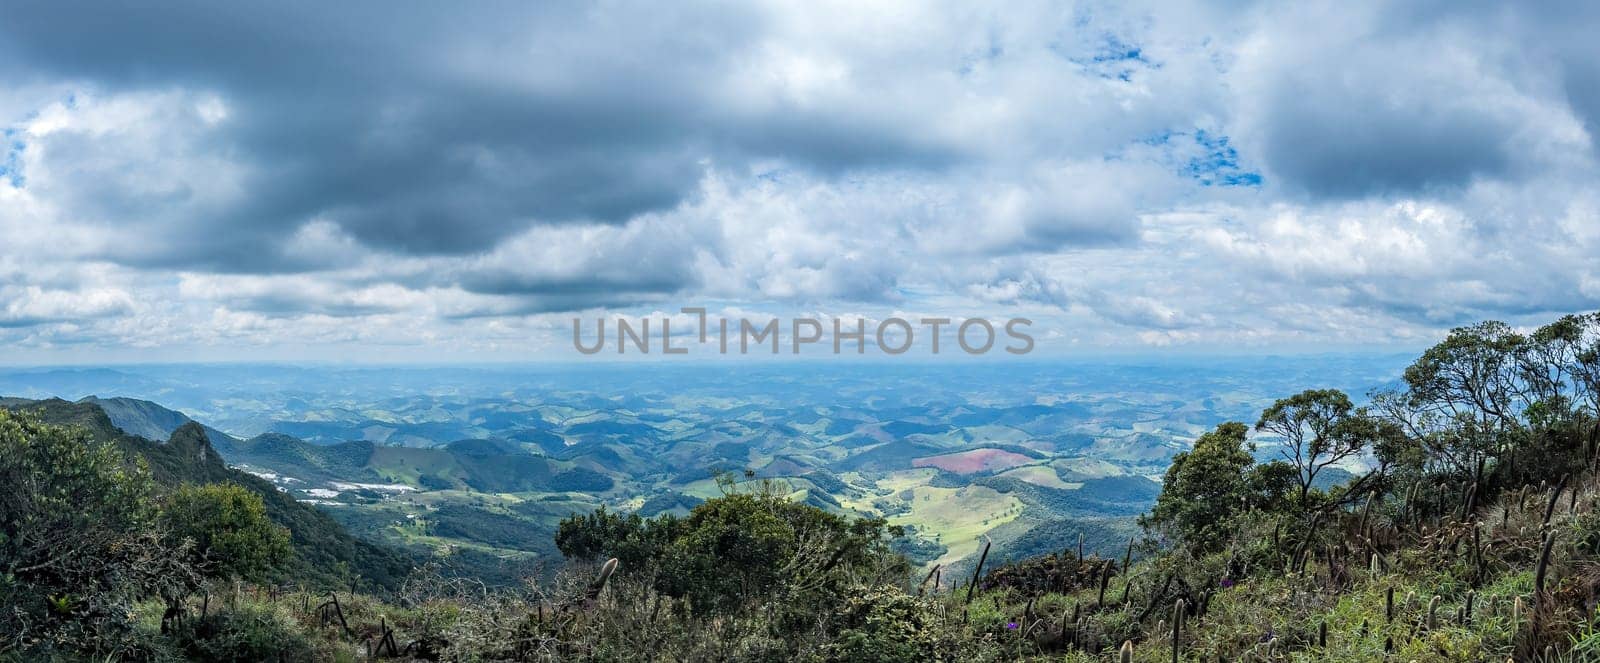 Scenic hilly terrain with lush flora under a cloudy sky.